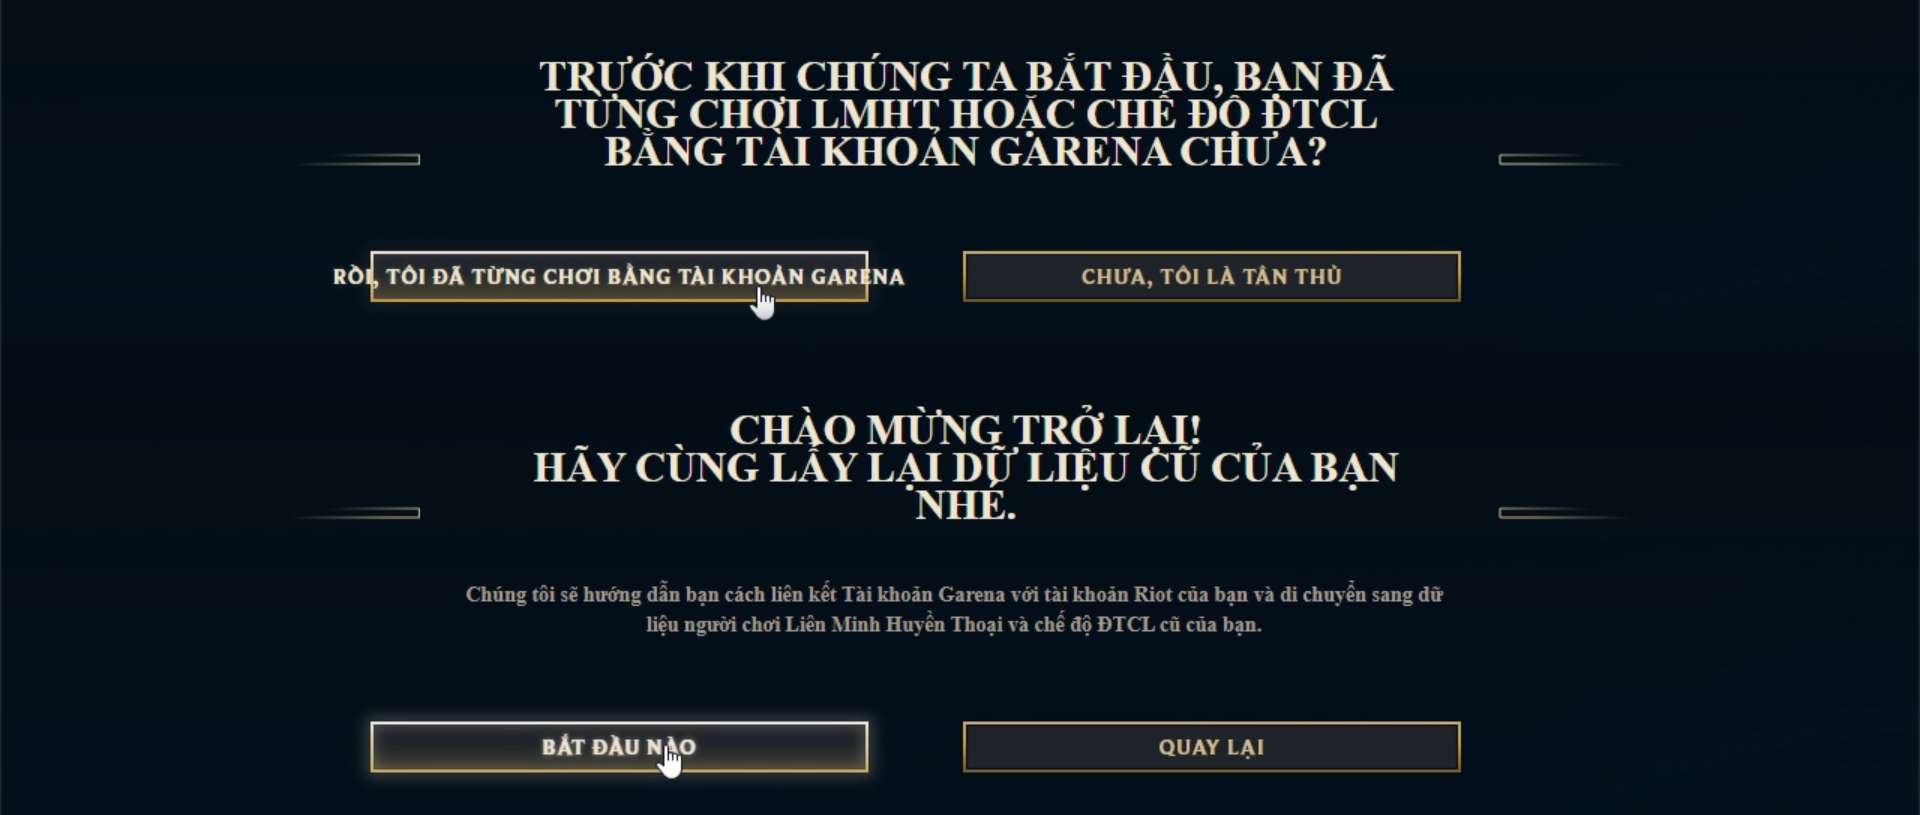 India "Yes, I used to play with my Garena account"then press "Start".